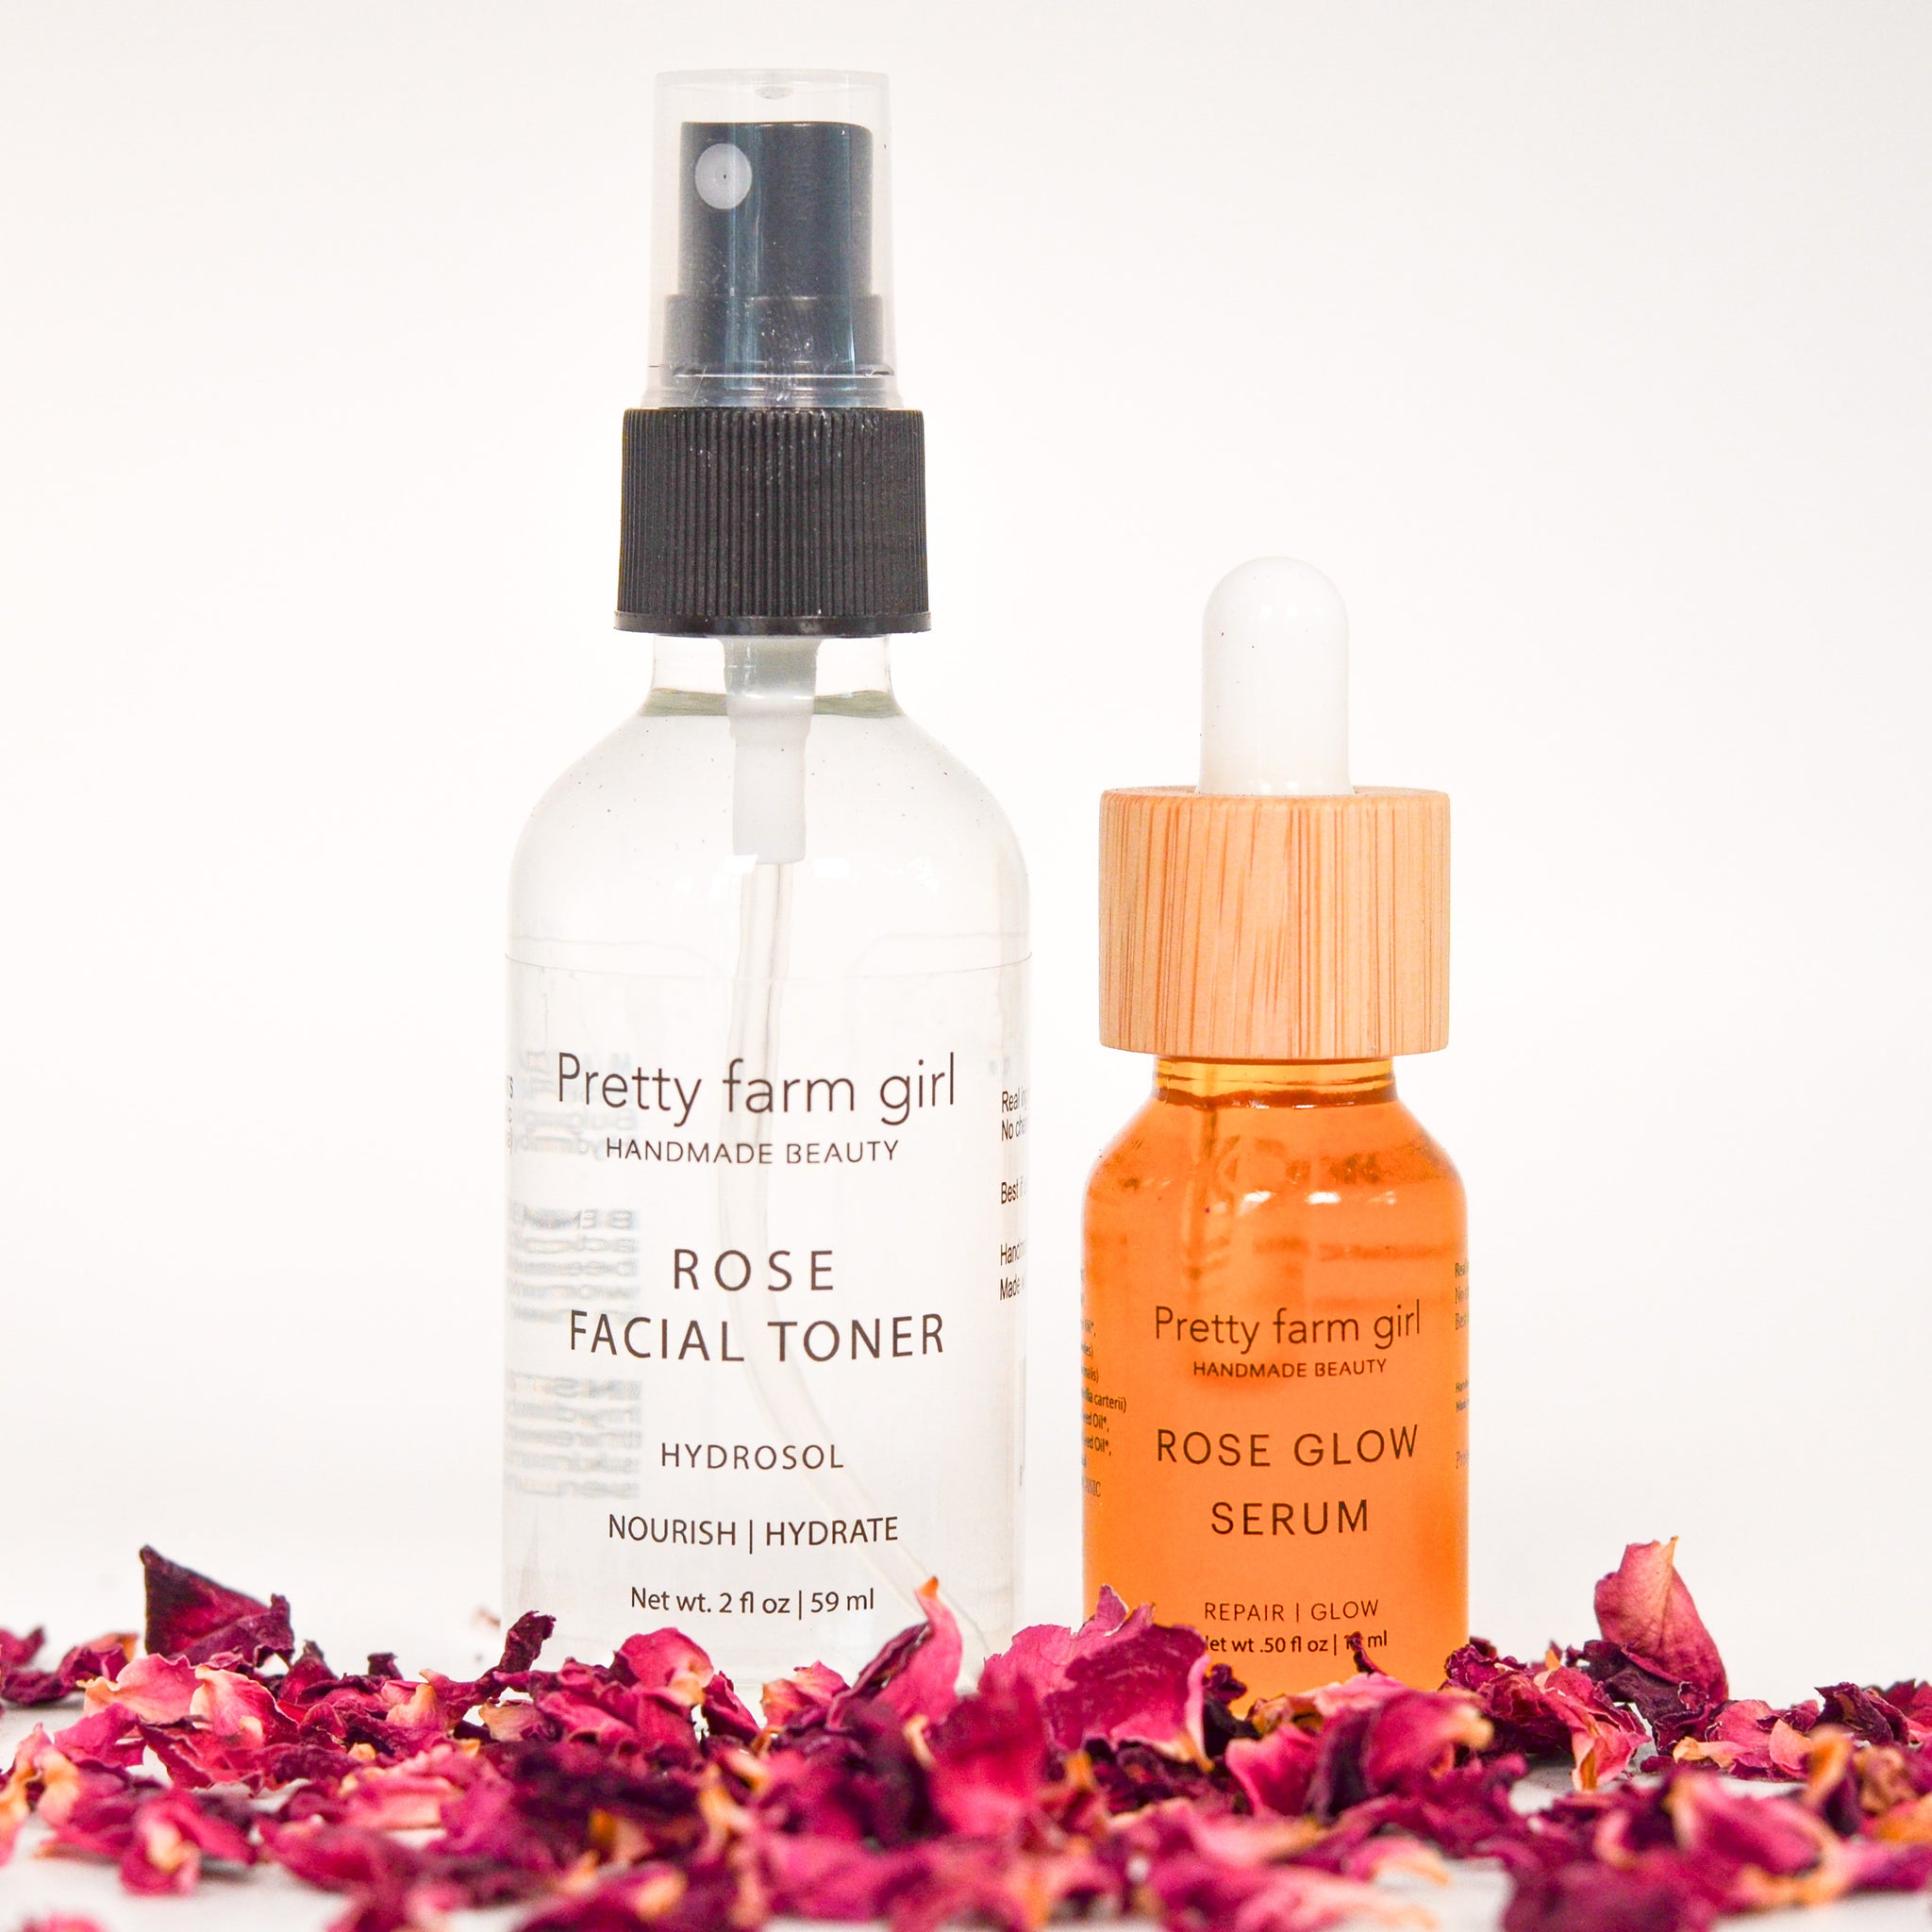 The Ultimate Clean Beauty Face Kit, Rose Glow Serum